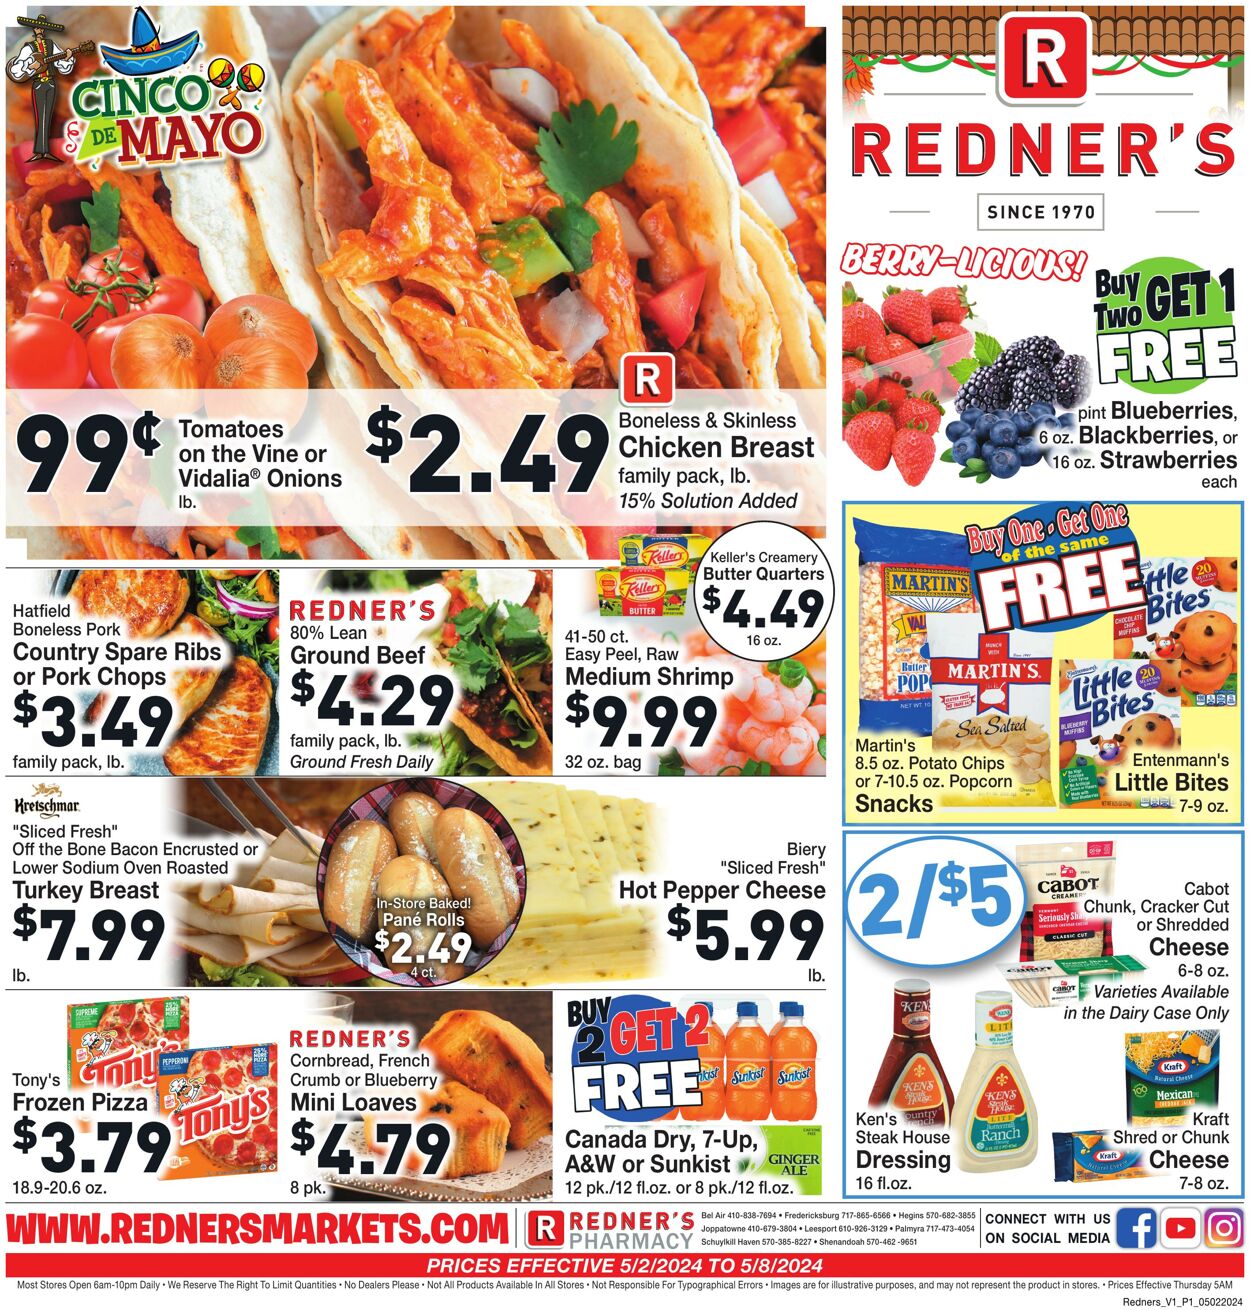 Redner's Markets Promotional weekly ads